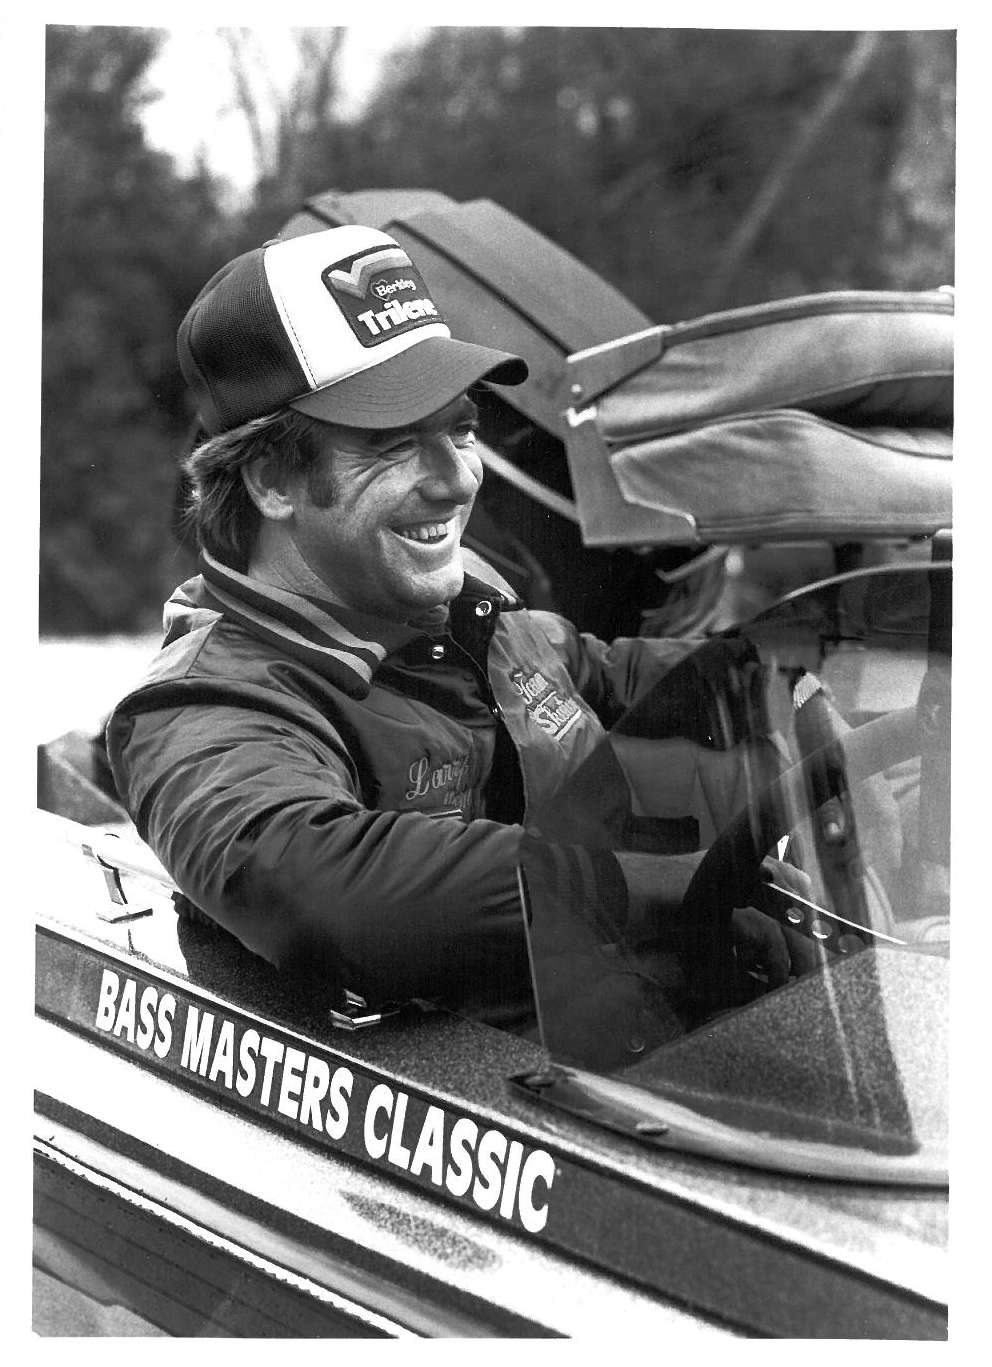 <b>1982</b><br>In 1982, Nixon won two events, one on Lake Bistineau and the other on the Ohio River, to take his second AOY title. In 12 seasons between 1977 and 1988, Nixon never ranked lower than eighth in AOY. For nine of those years, from 1979 to 1987, he was in the Top 5. It's the best AOY run anyone has ever posted.